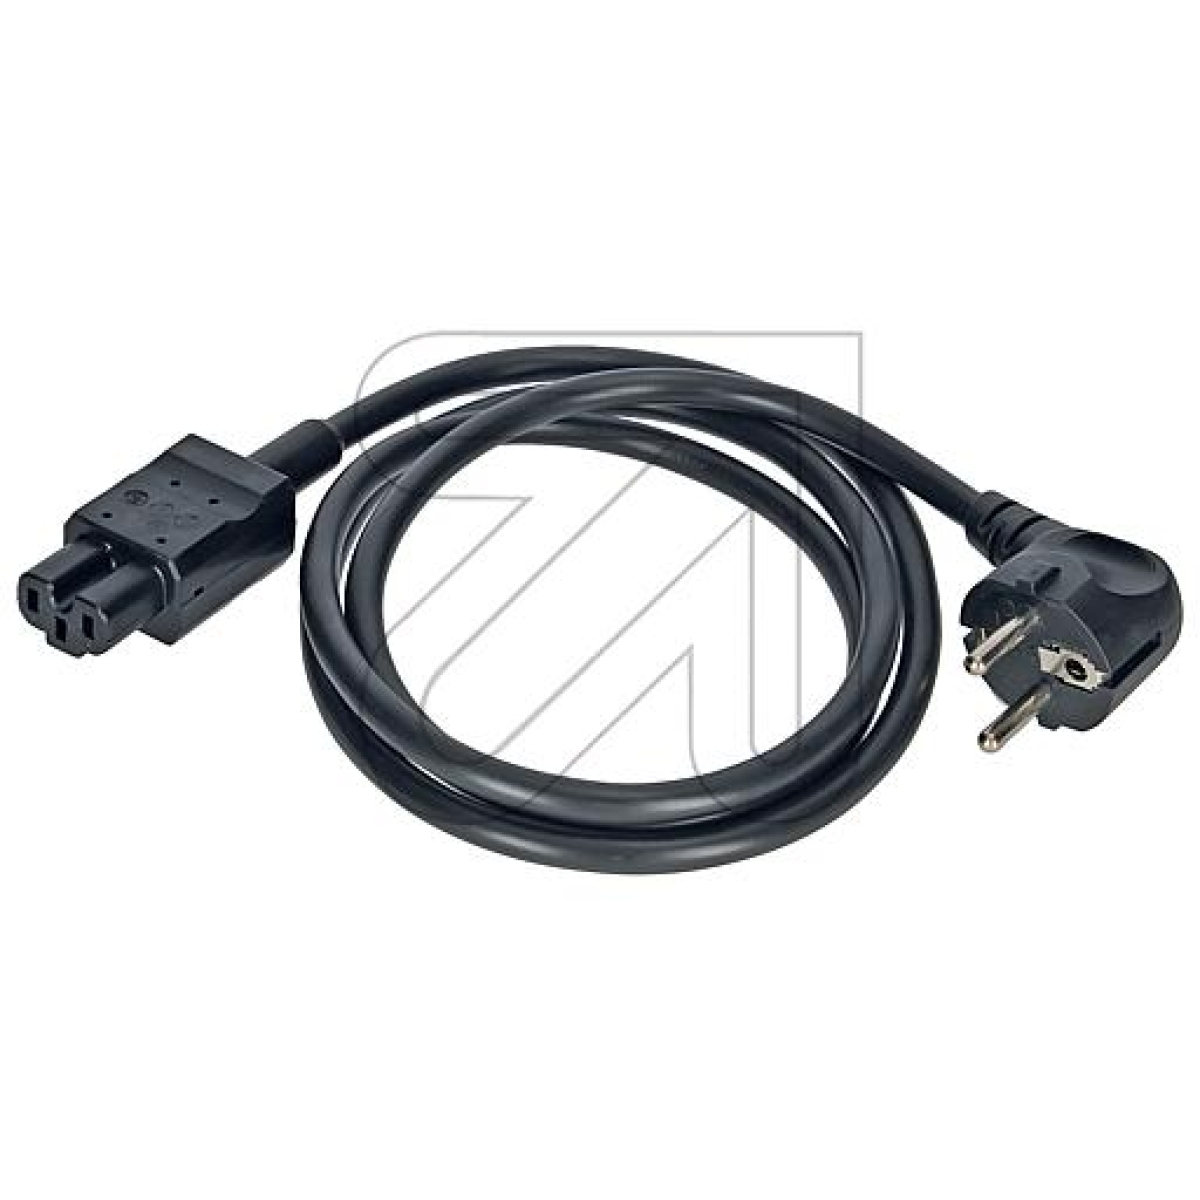 EGBHot device supply line black 1.5mArticle-No: 034100